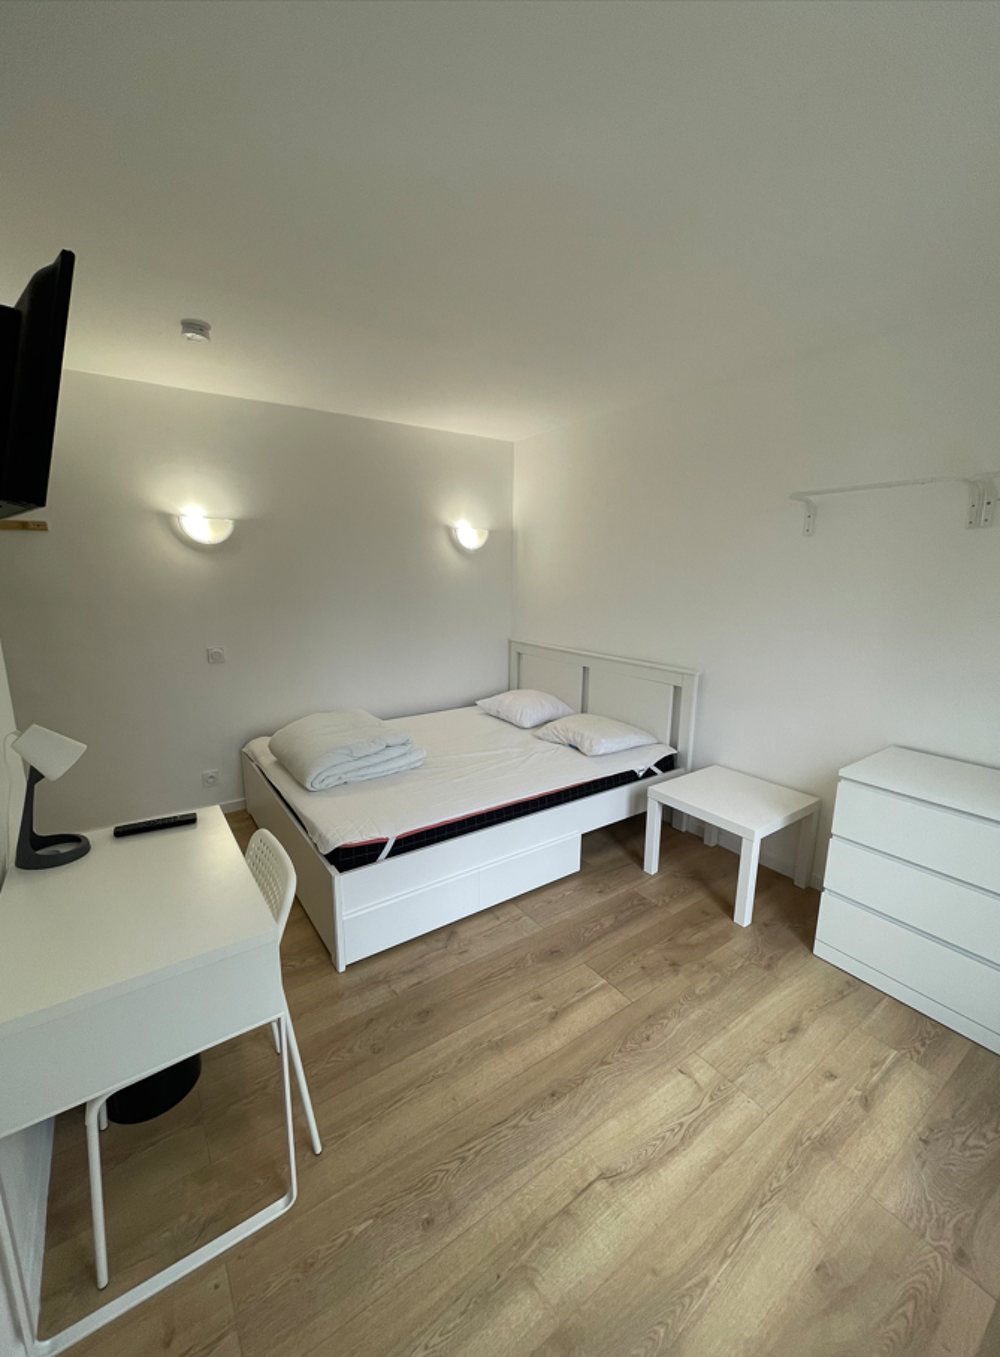 Location Colocation Co-living - Trs belle maison entirement rnove - Talence Talence